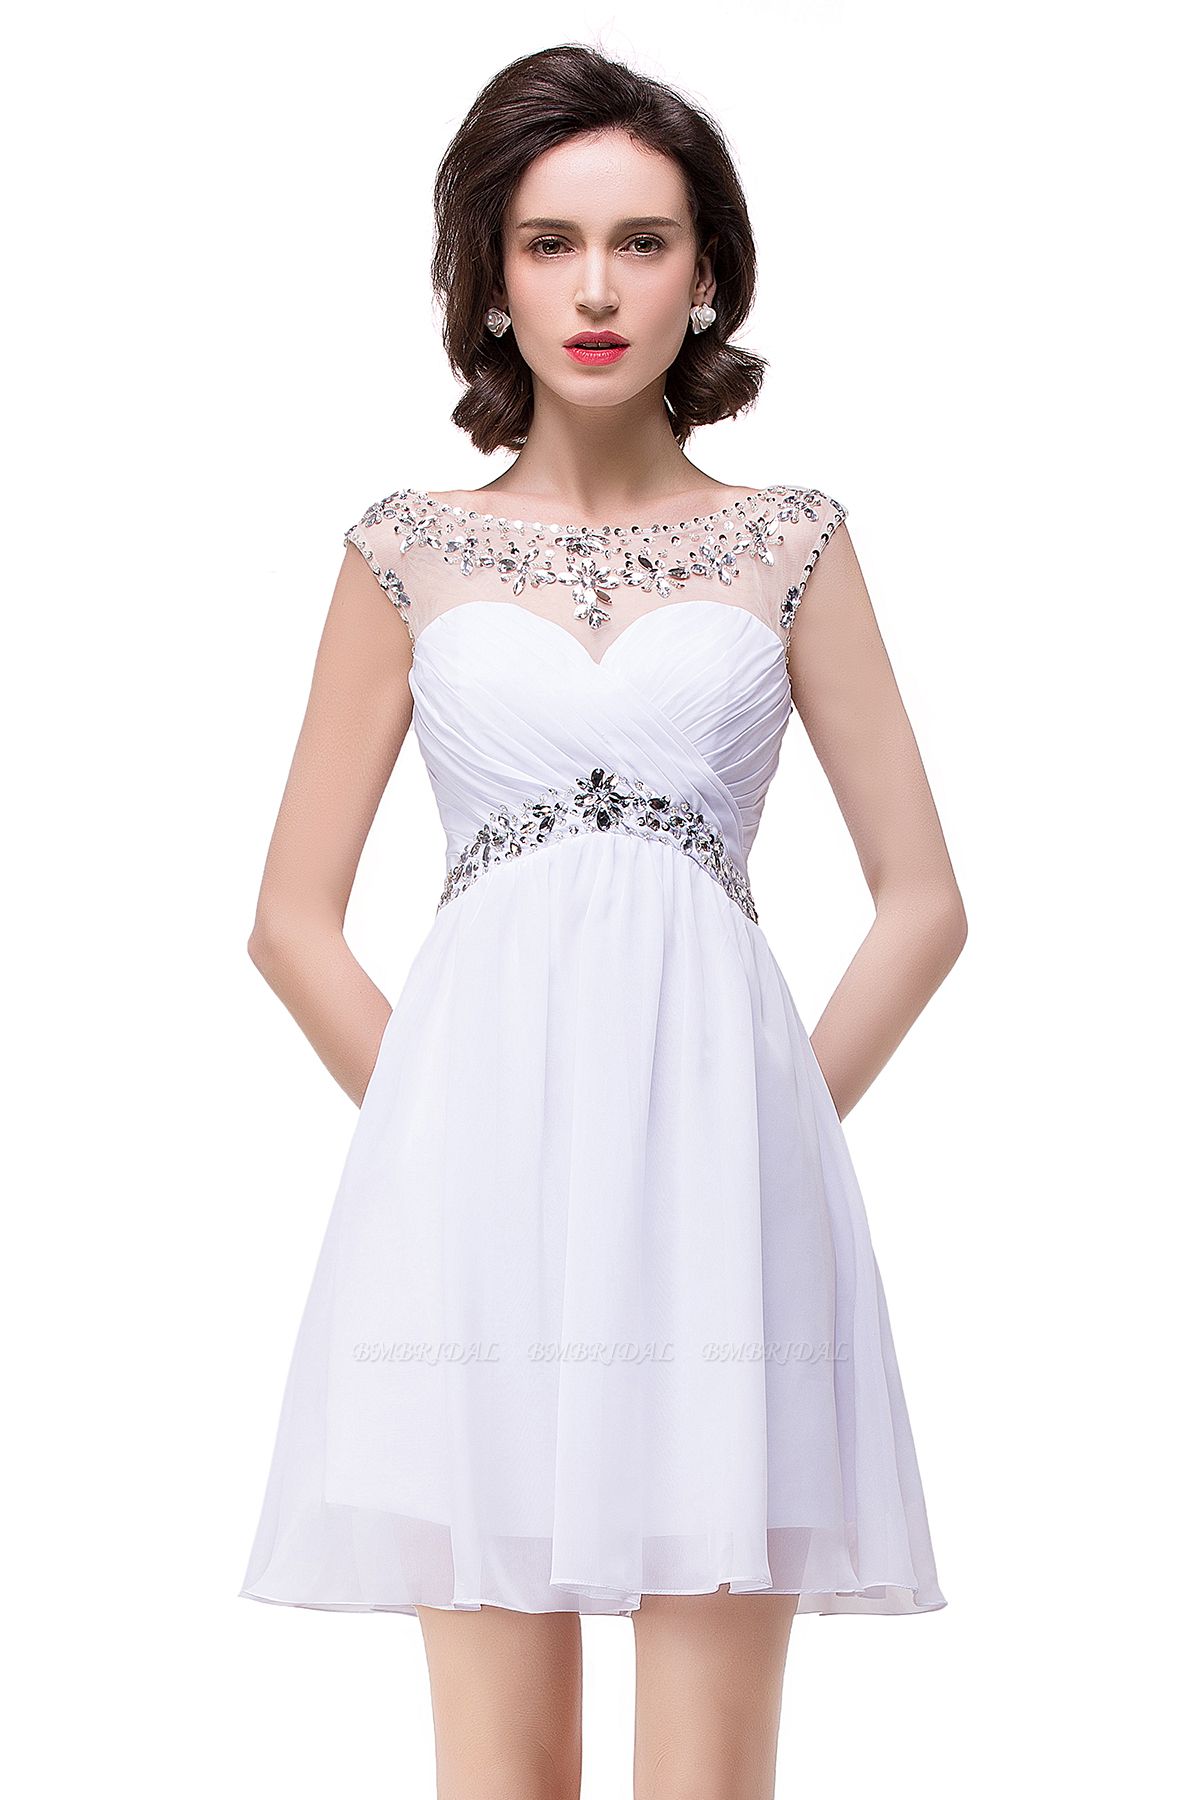 BMbridal A-line Jewel Chiffon Party Dress With Crystal